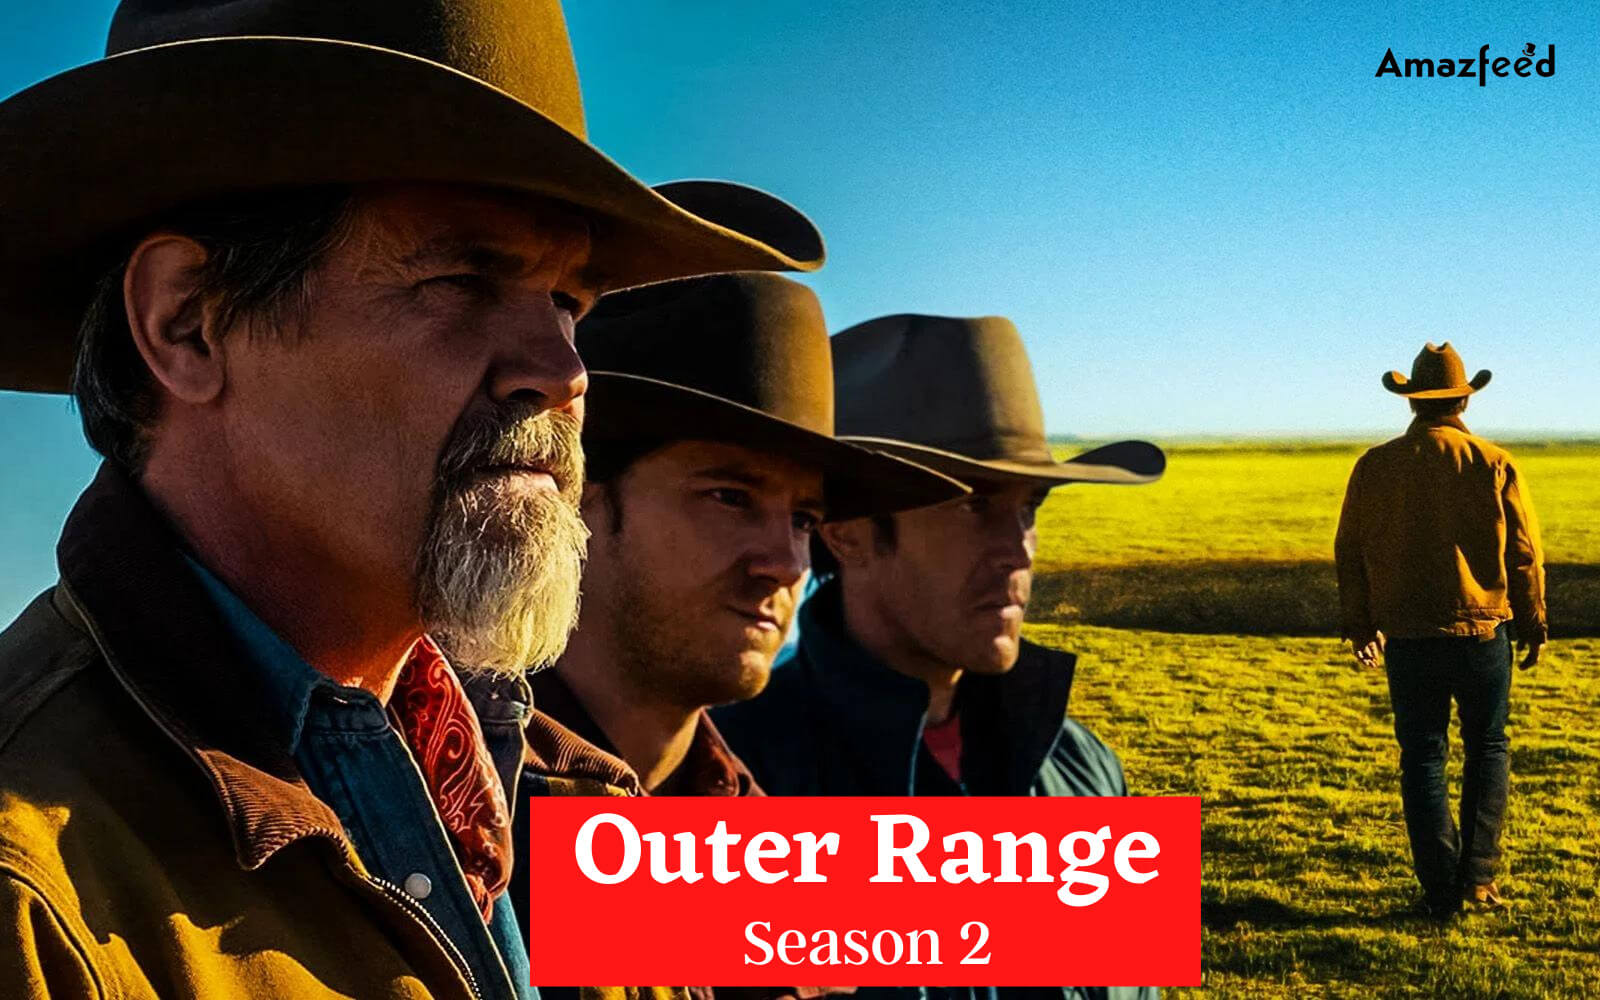 Outer Range Season 2 ⇒ Release Date, News, Cast, Spoilers & Updates